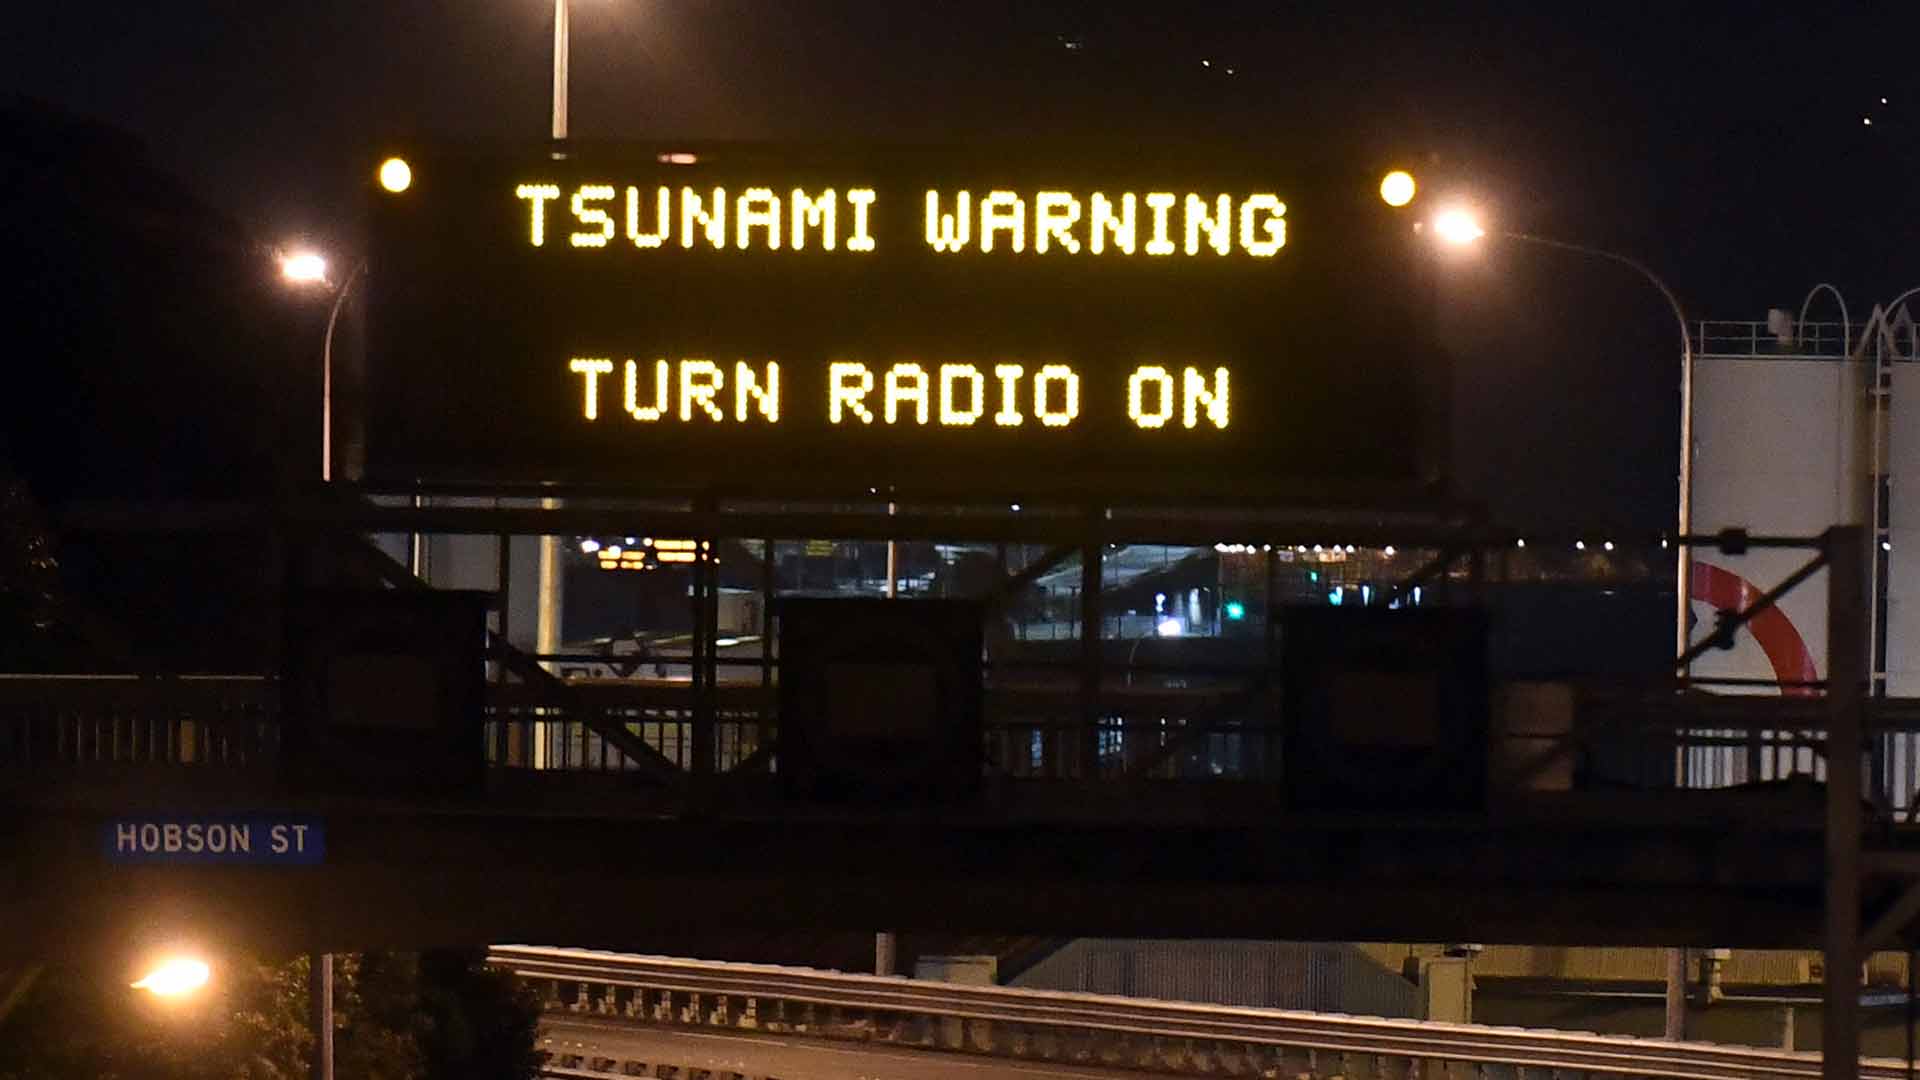 Motorway sign warning of Tsunami, in Wellington, Monday, Nov. 14, 2016, after a major earthquake struck New Zealand's south Island early Monday.  A powerful earthquake struck in a mostly rural area close to the city of Christchurch but appeared to be more strongly felt in the capital, Wellington, more than 200 Km (120 miles) away. (Ross Setford/SNPA via AP)